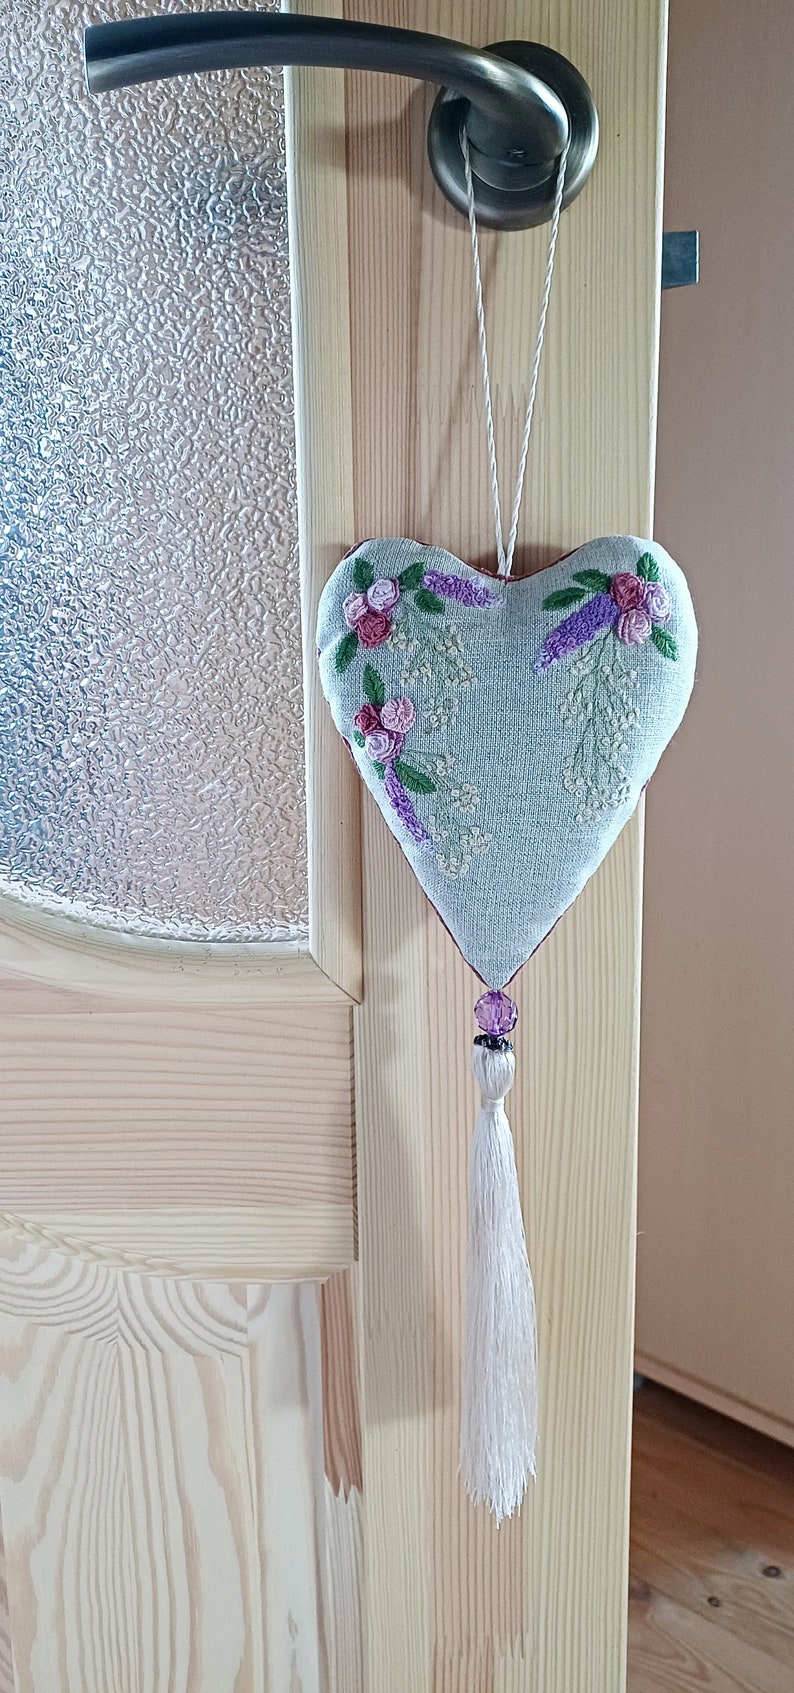 Handmade embroidered linen heart shaped home decor sachet, with hanging loop and tassel. Hung on a door hanger.